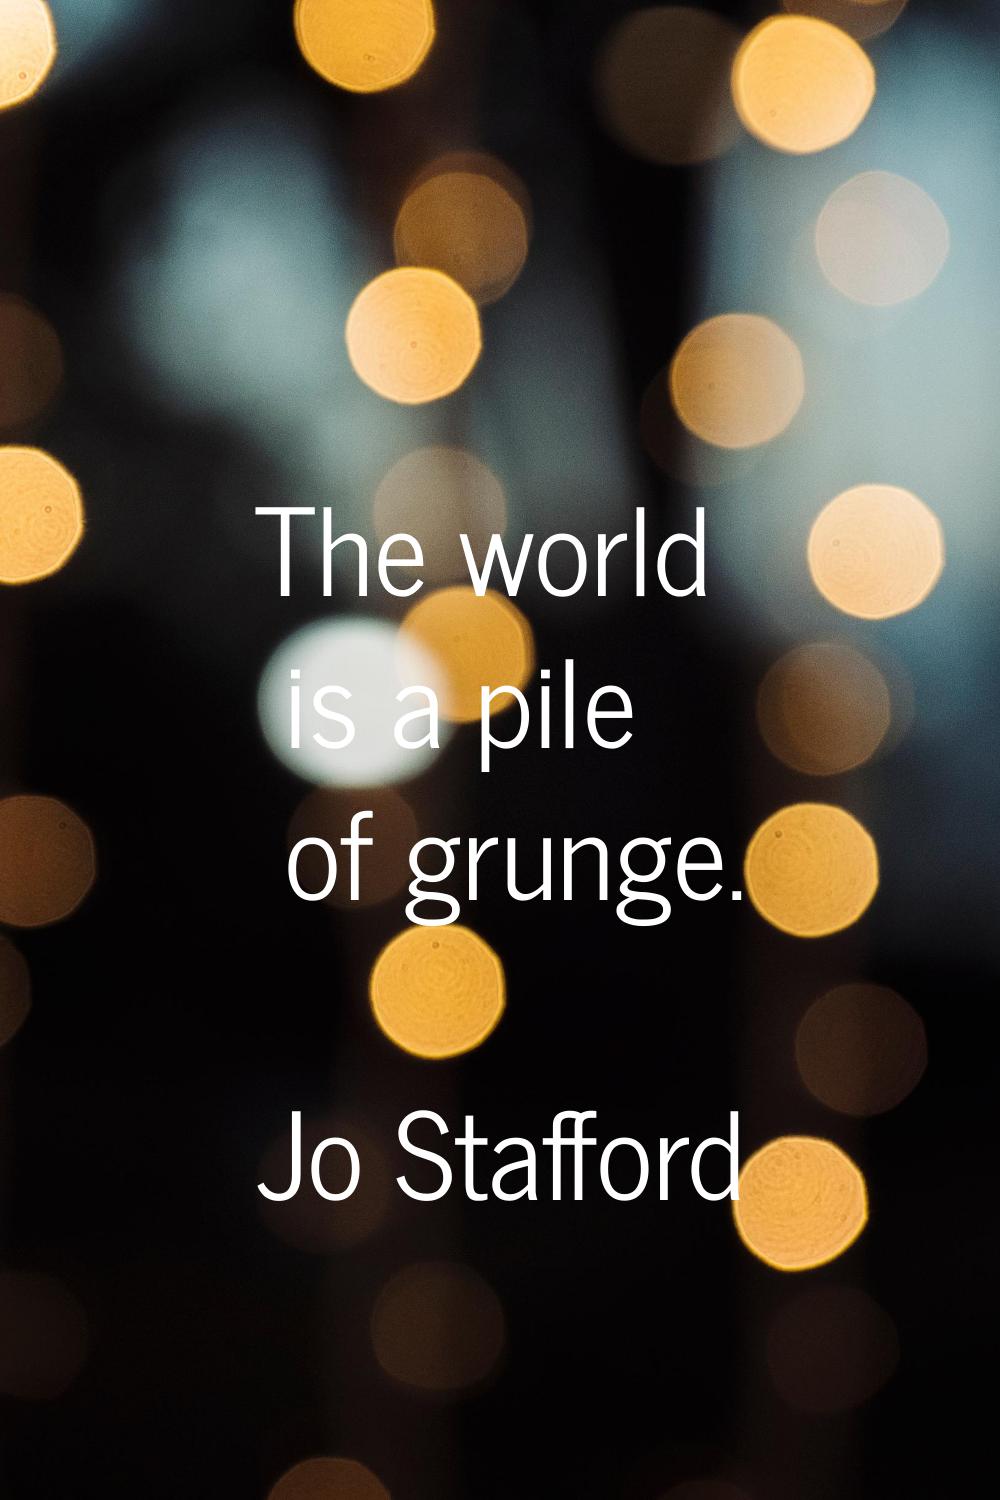 The world is a pile of grunge.